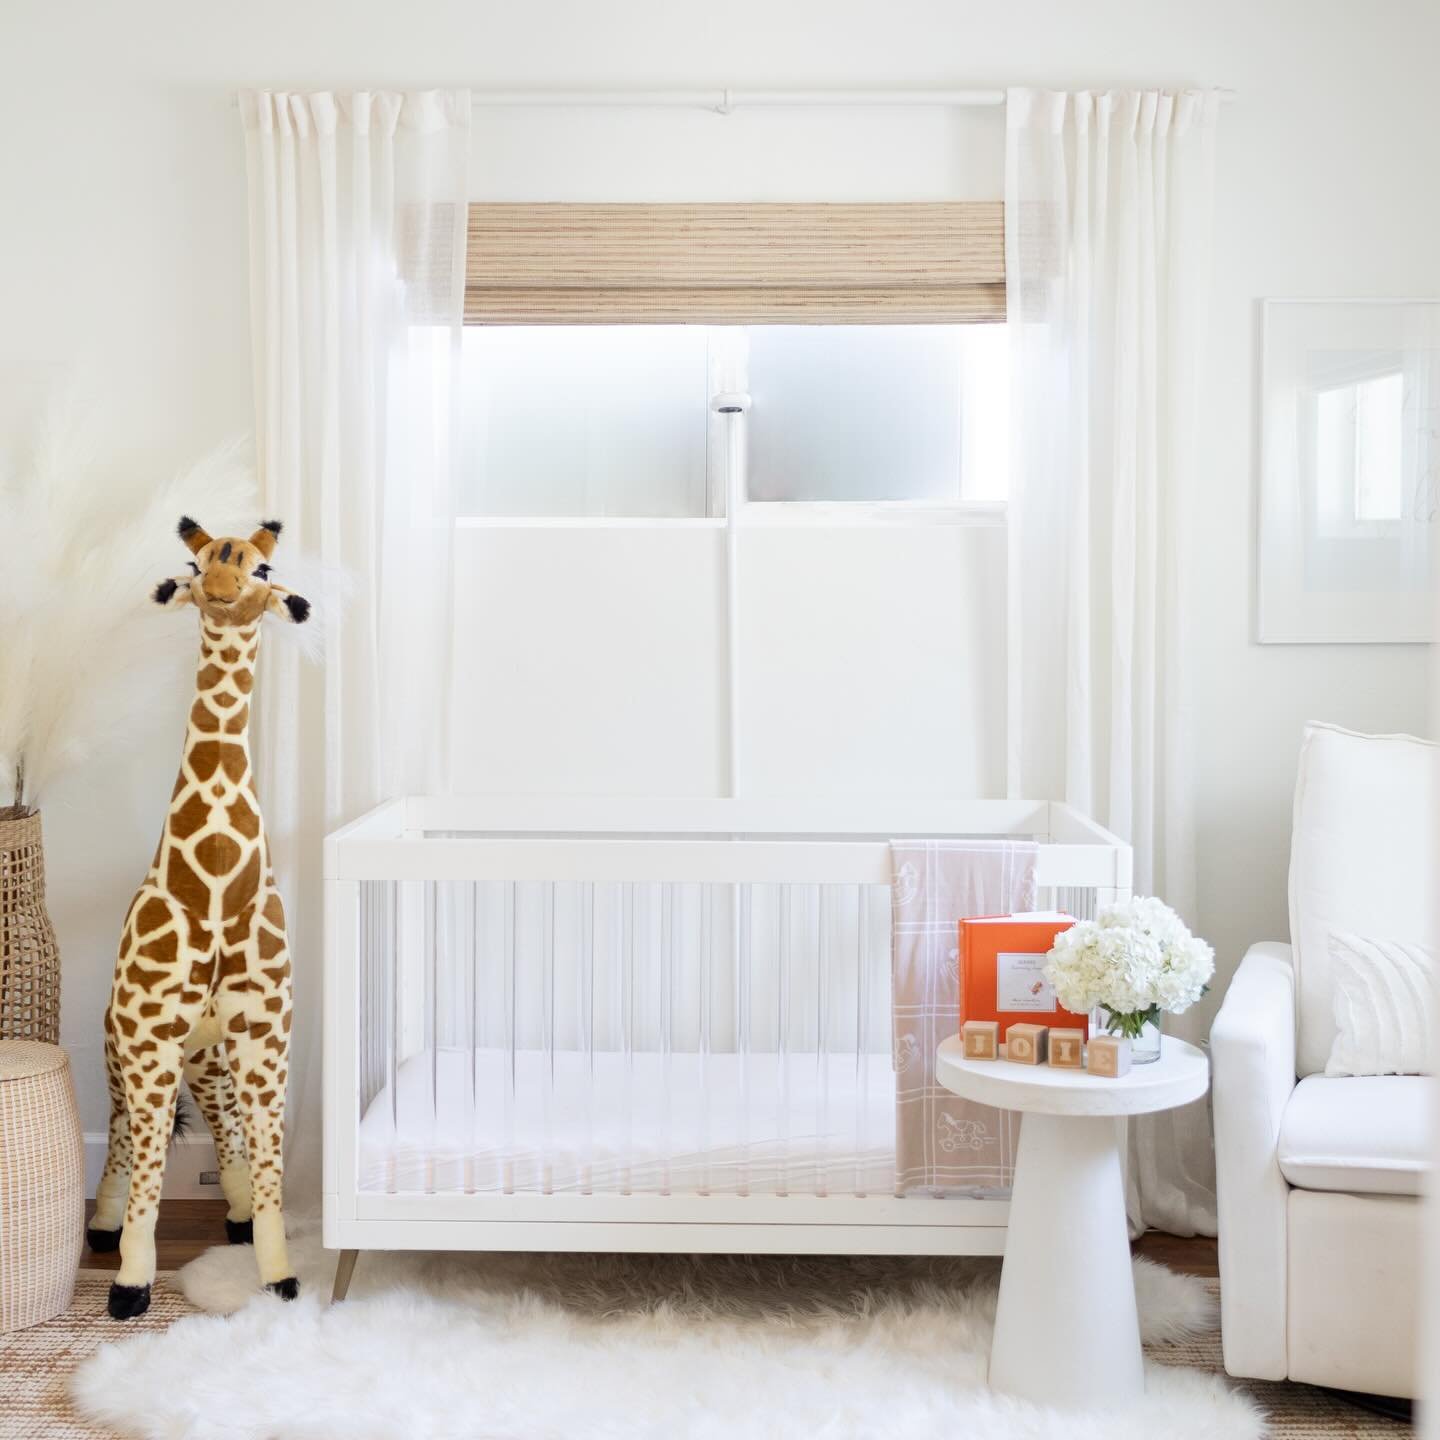 By far my favorite room in our home, my daughter Joie&rsquo;s room 🦒

We always knew we wanted a giraffe/safari theme as my husband &amp; I fell in love while traveling through S. Africa. I&rsquo;m pretty sure I had this nursery designed well before